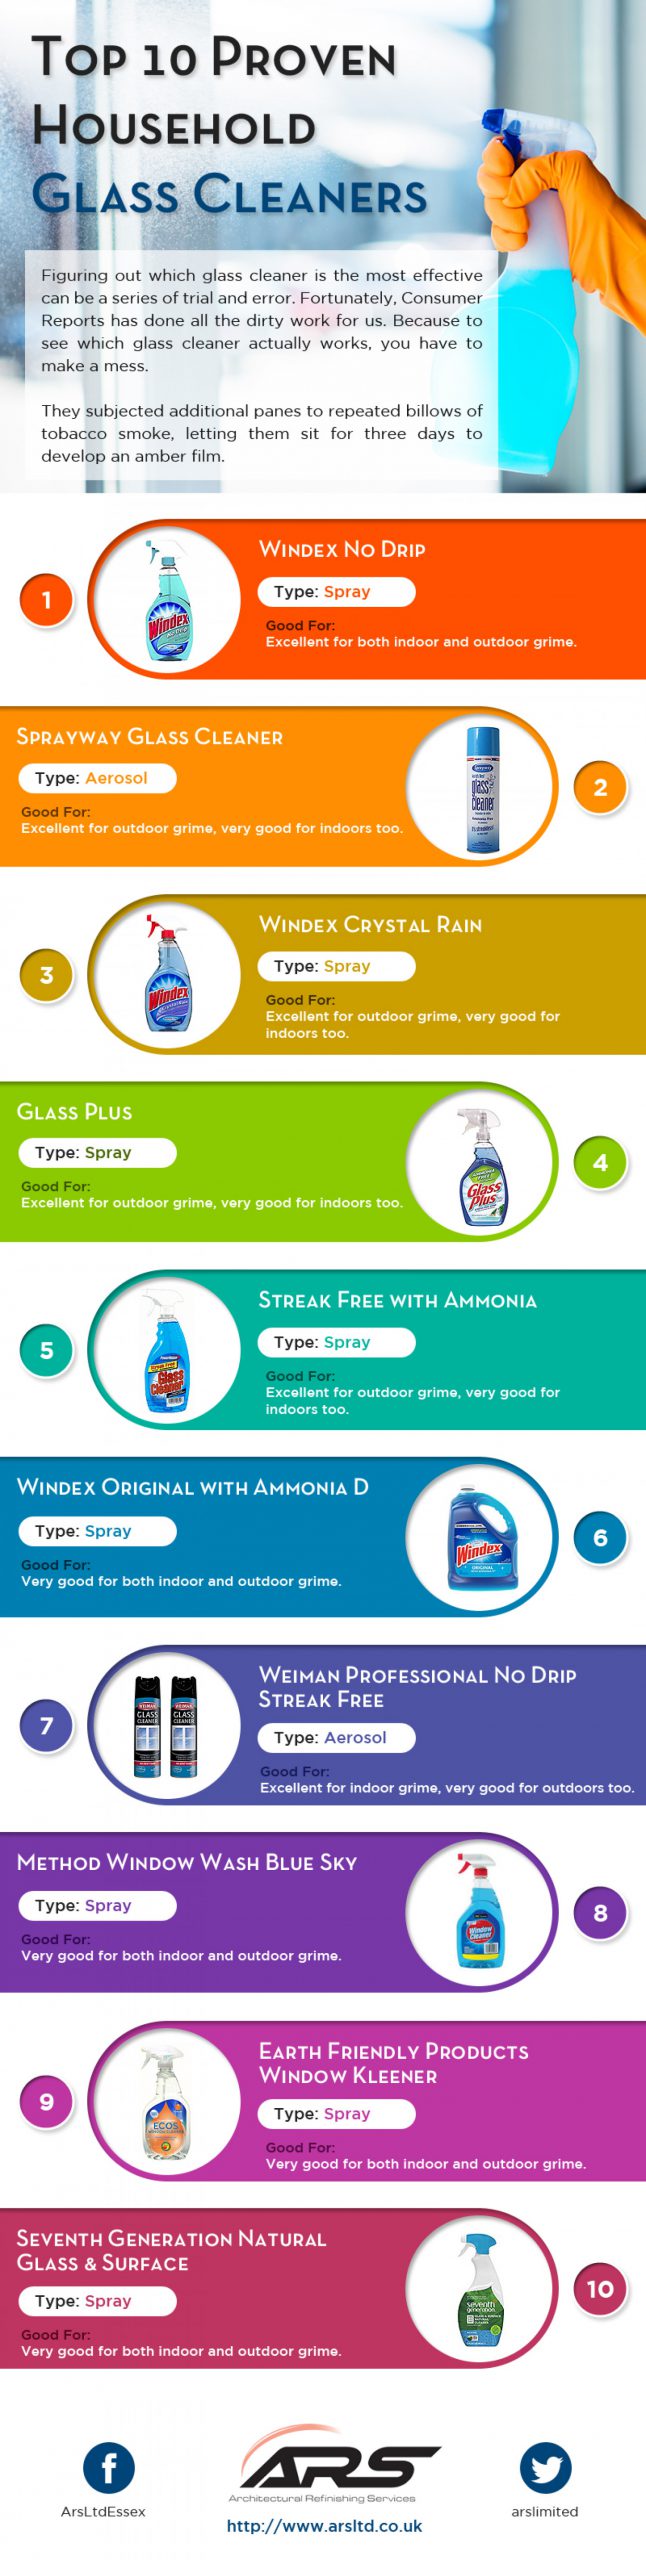 home-glass-cleaner